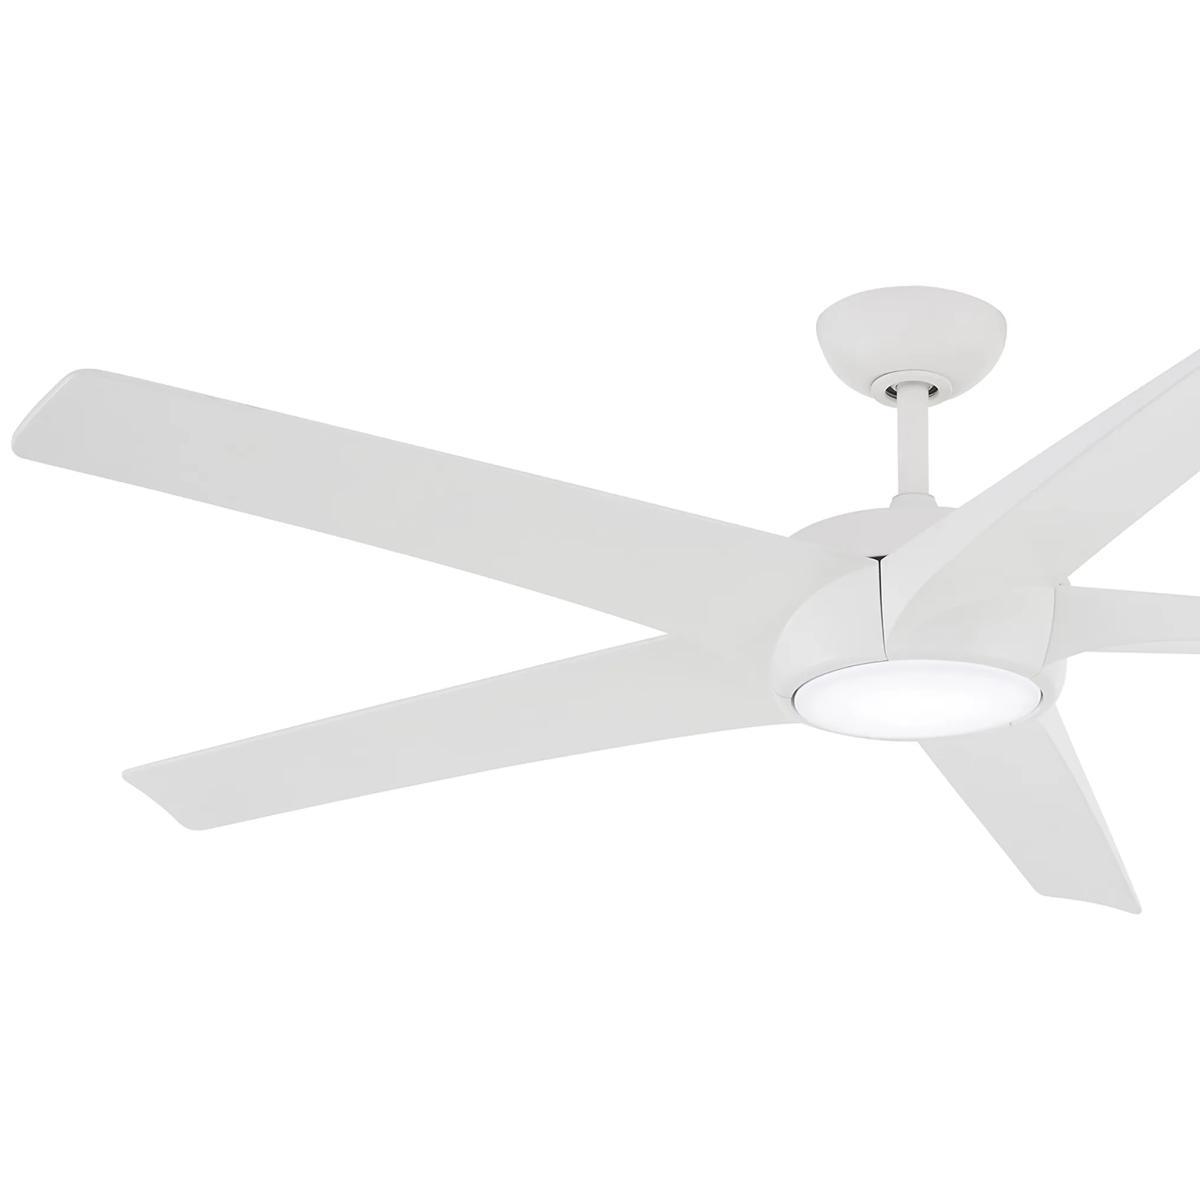 Skymaster 64 Inch LED Ceiling Fan with Light Kit and Remote, Flat White Finish - Bees Lighting